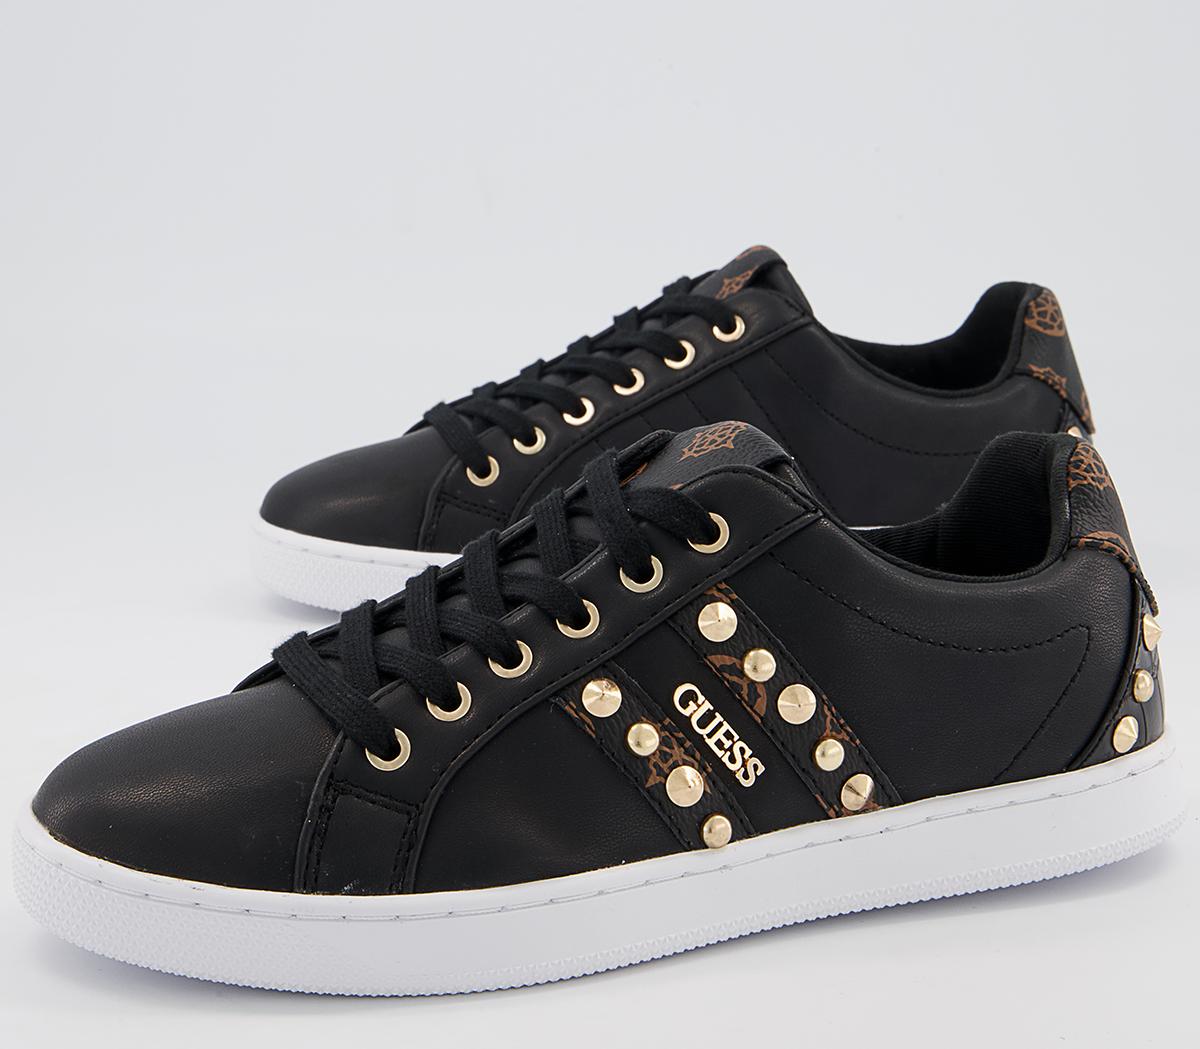 Guess Rassta Studded Trainers Black - Flat Shoes for Women